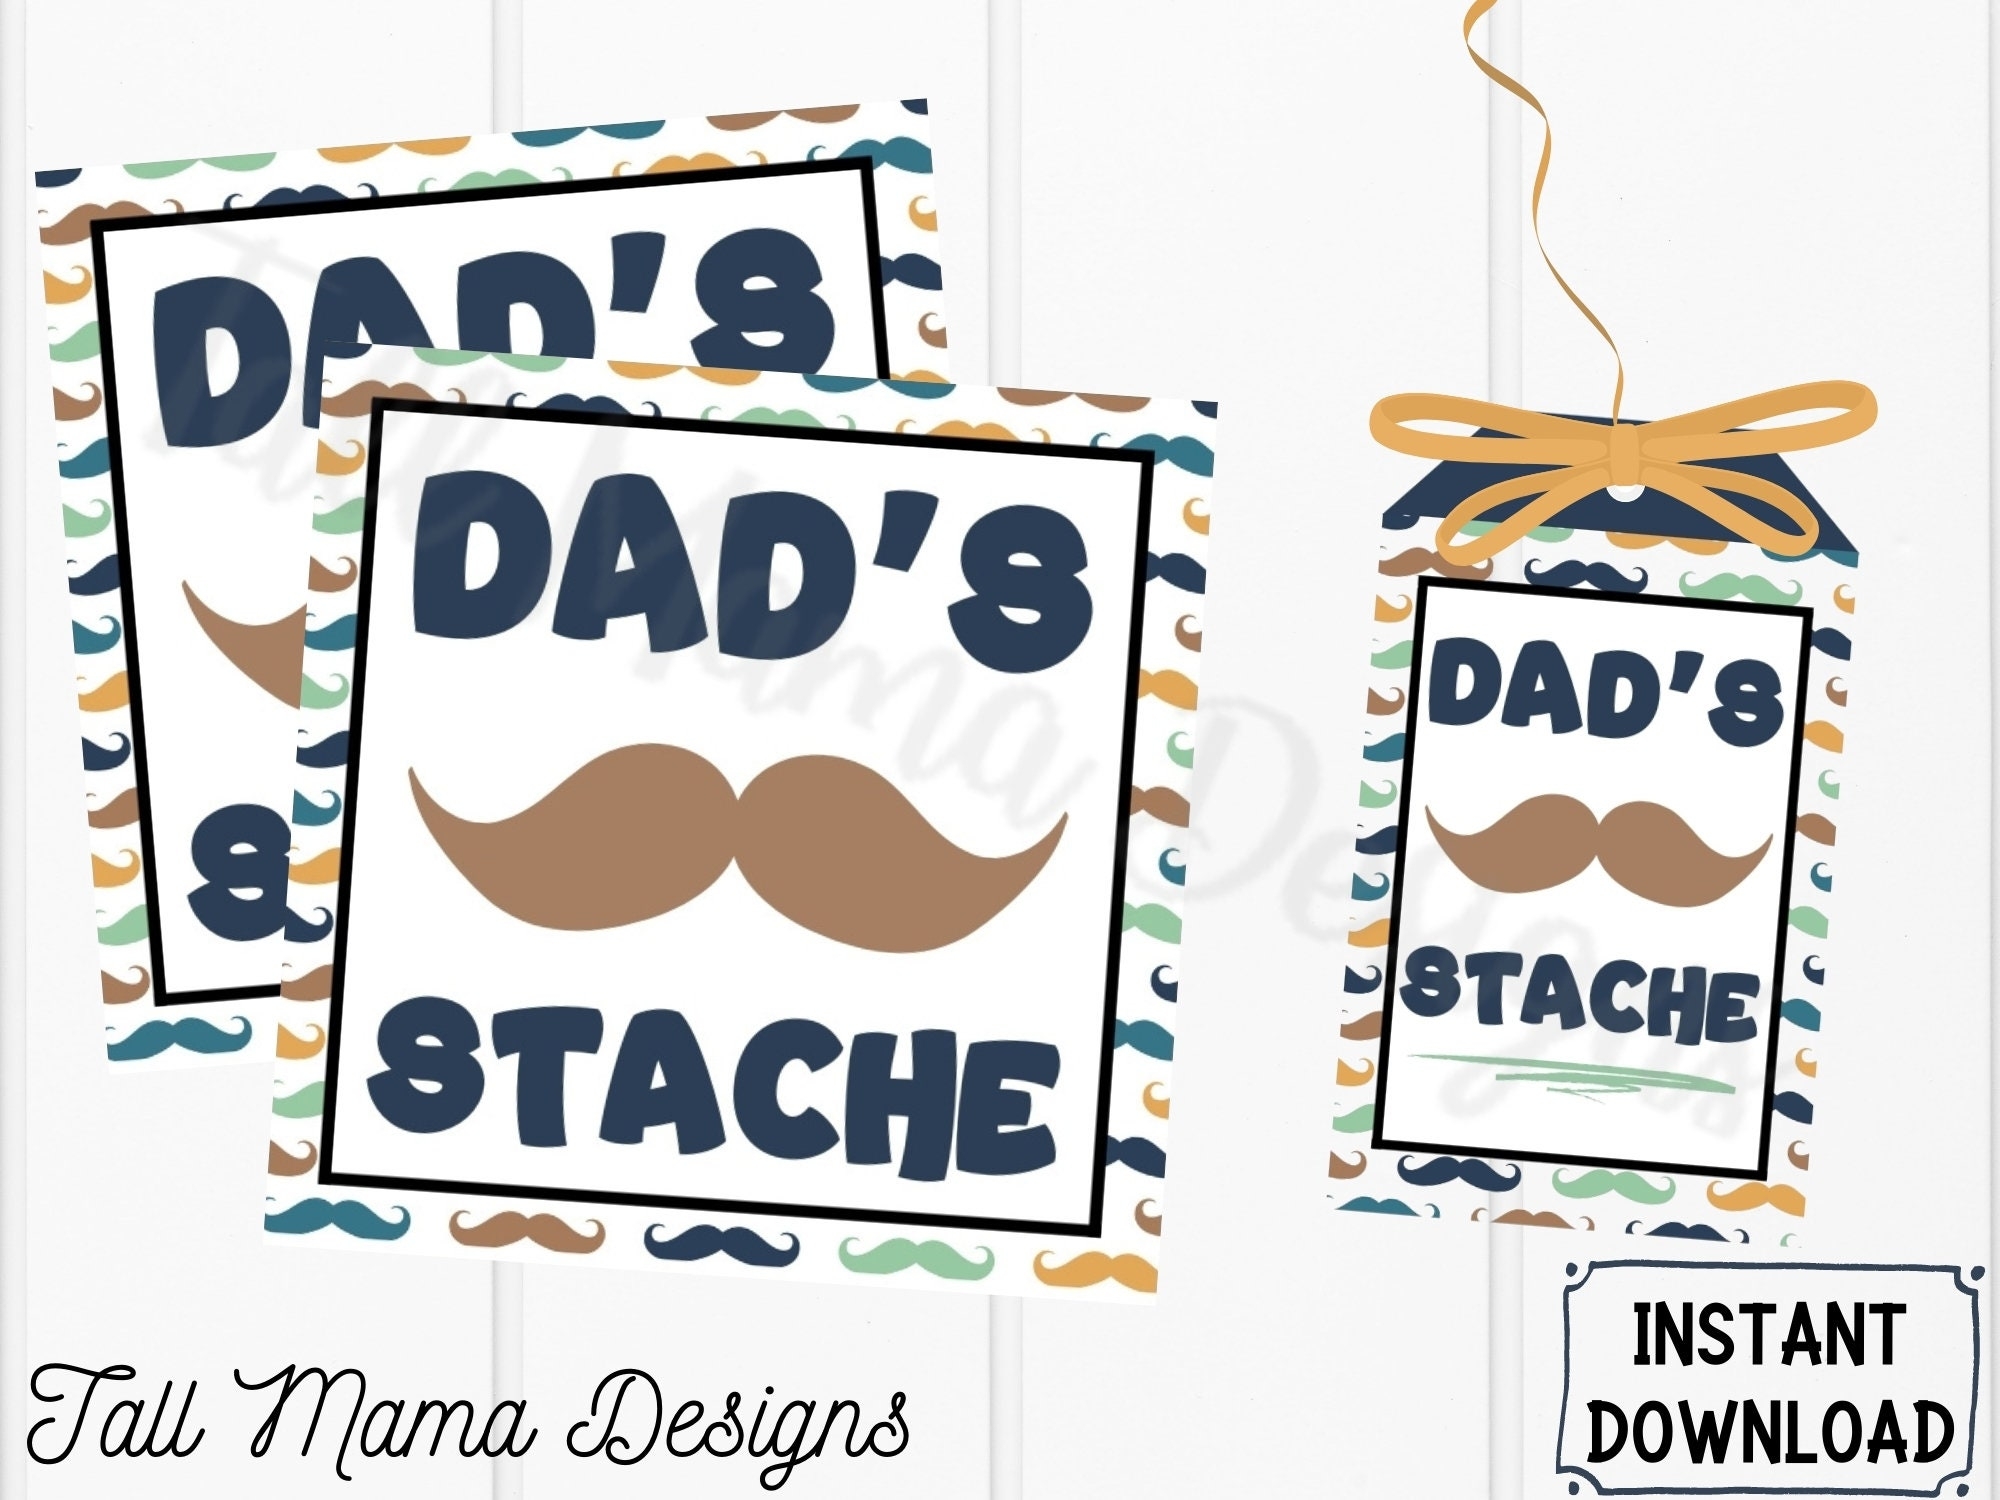 Dad s Stache Printable Gift Tag Digital Father s Day Gift Tag Father s Day Candy Gift Tag Dad Printable Candy Label Father s Day Etsy